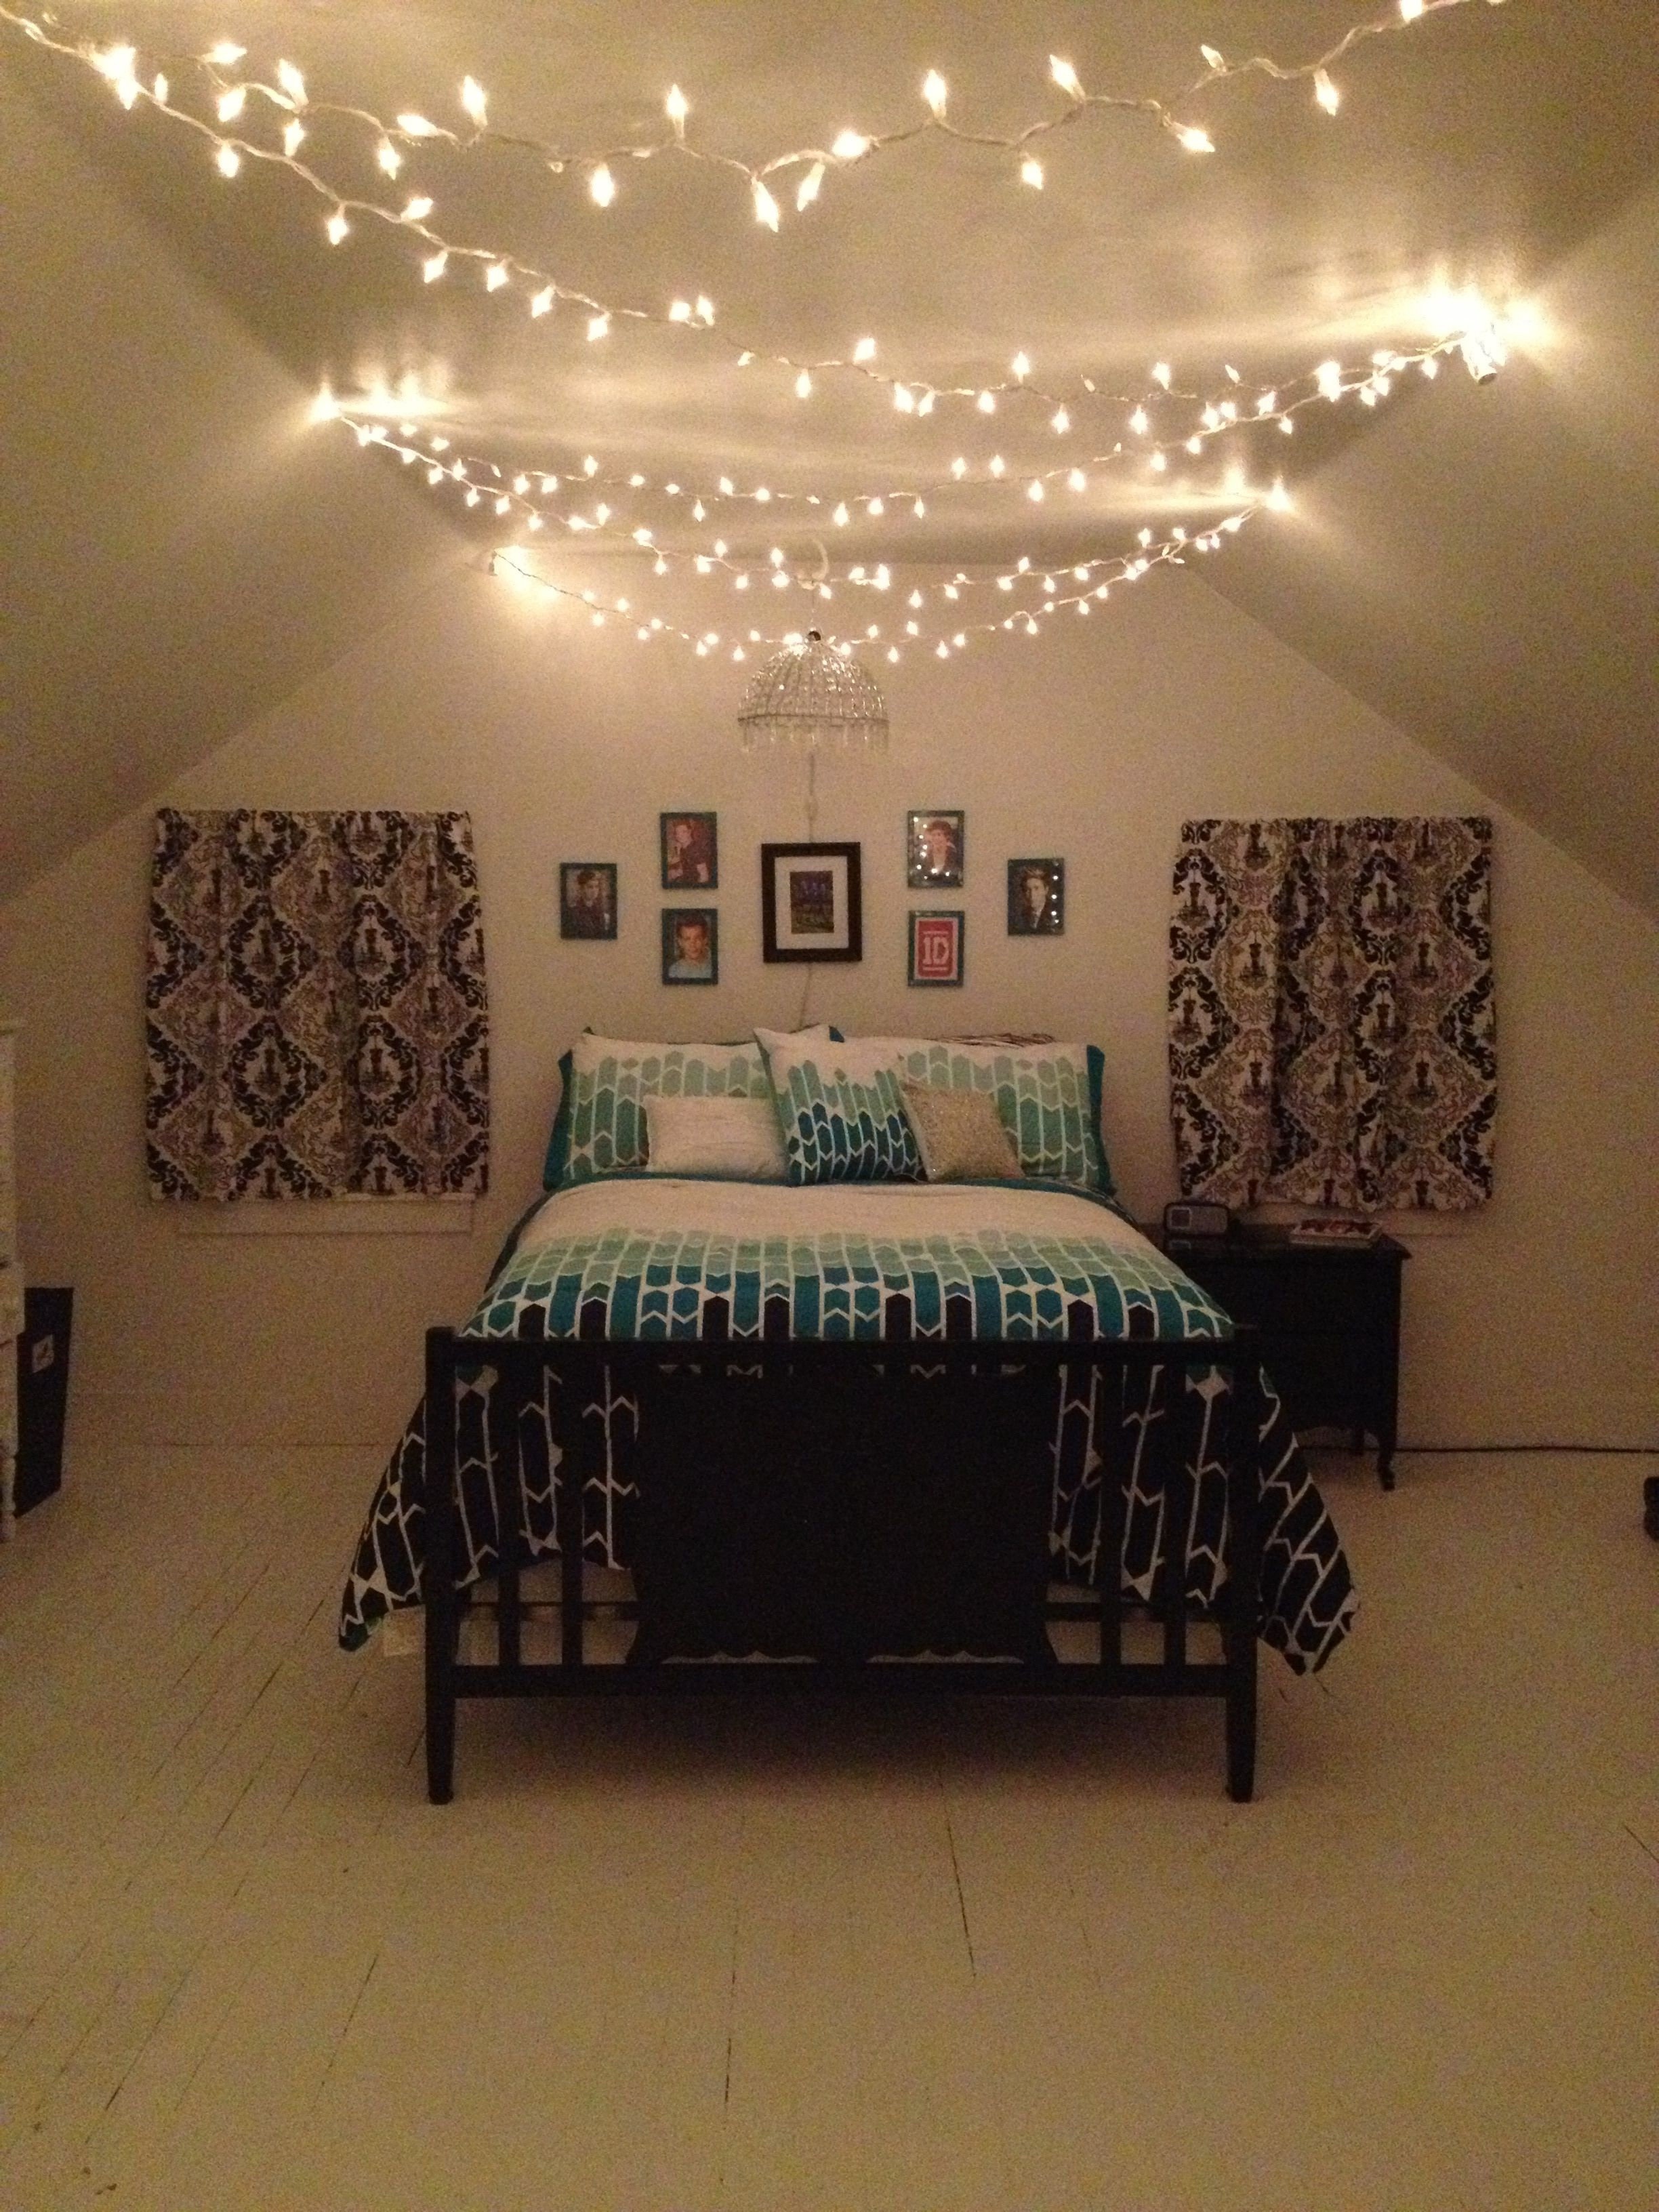 Teenage Bedroom Black White And Teal With Christmas Lights And One pertaining to sizing 2448 X 3264